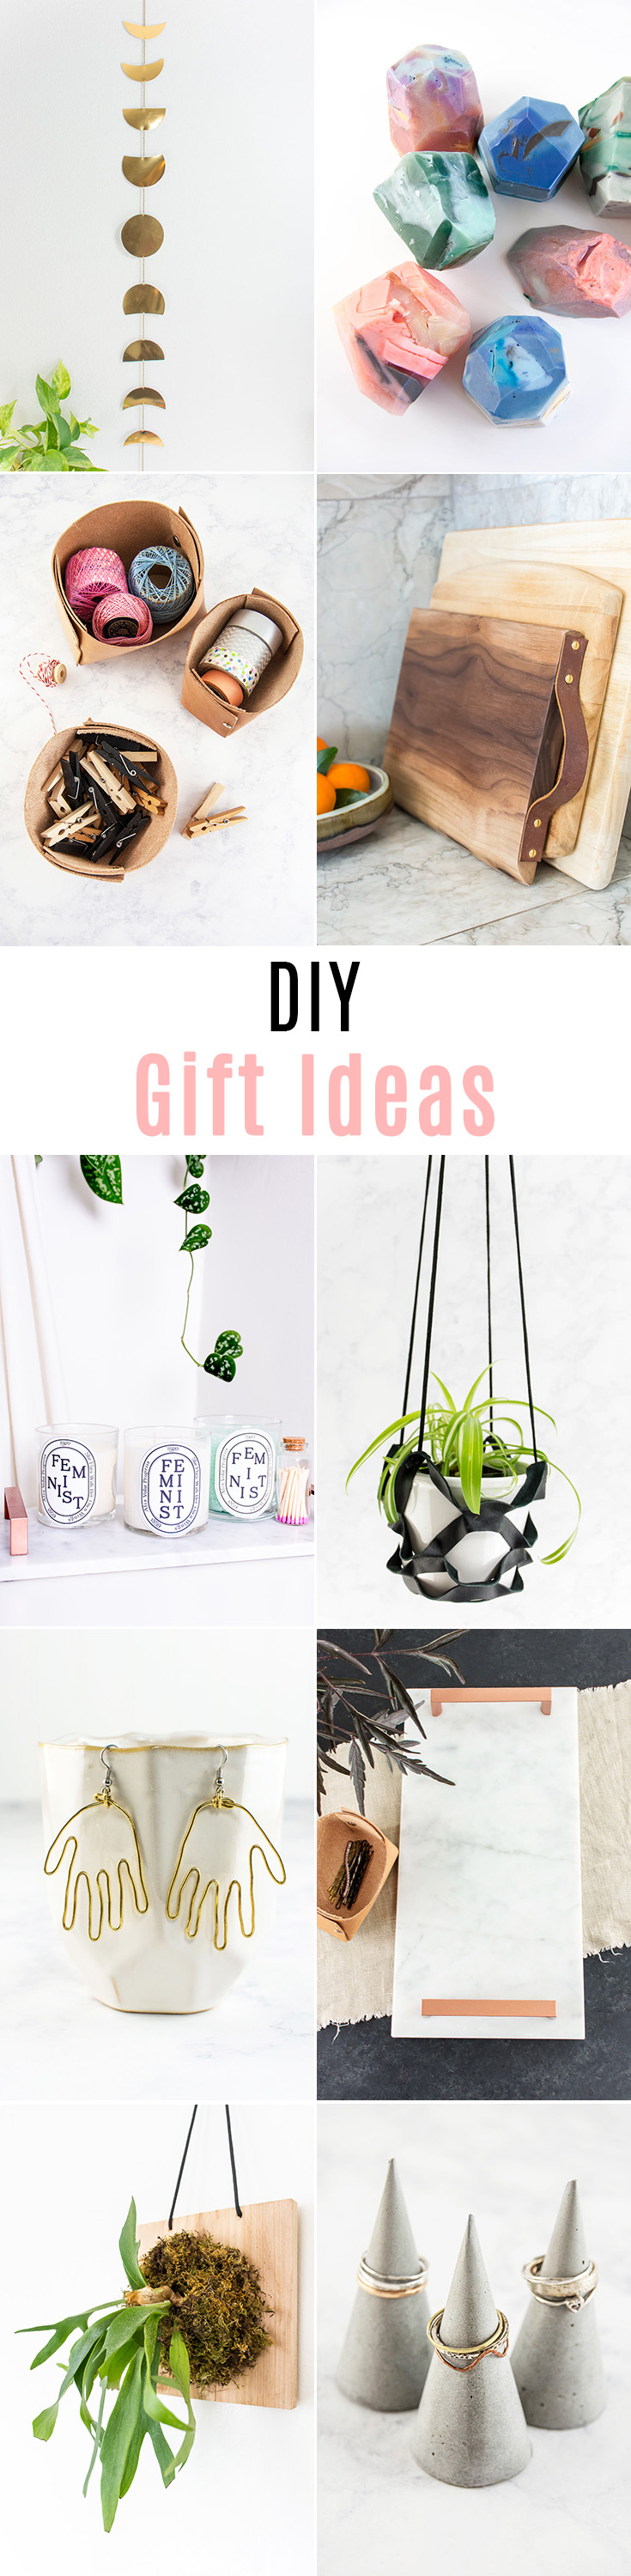 Want to make someone special a DIY gift? Here are 10 gifts you can make yourself.